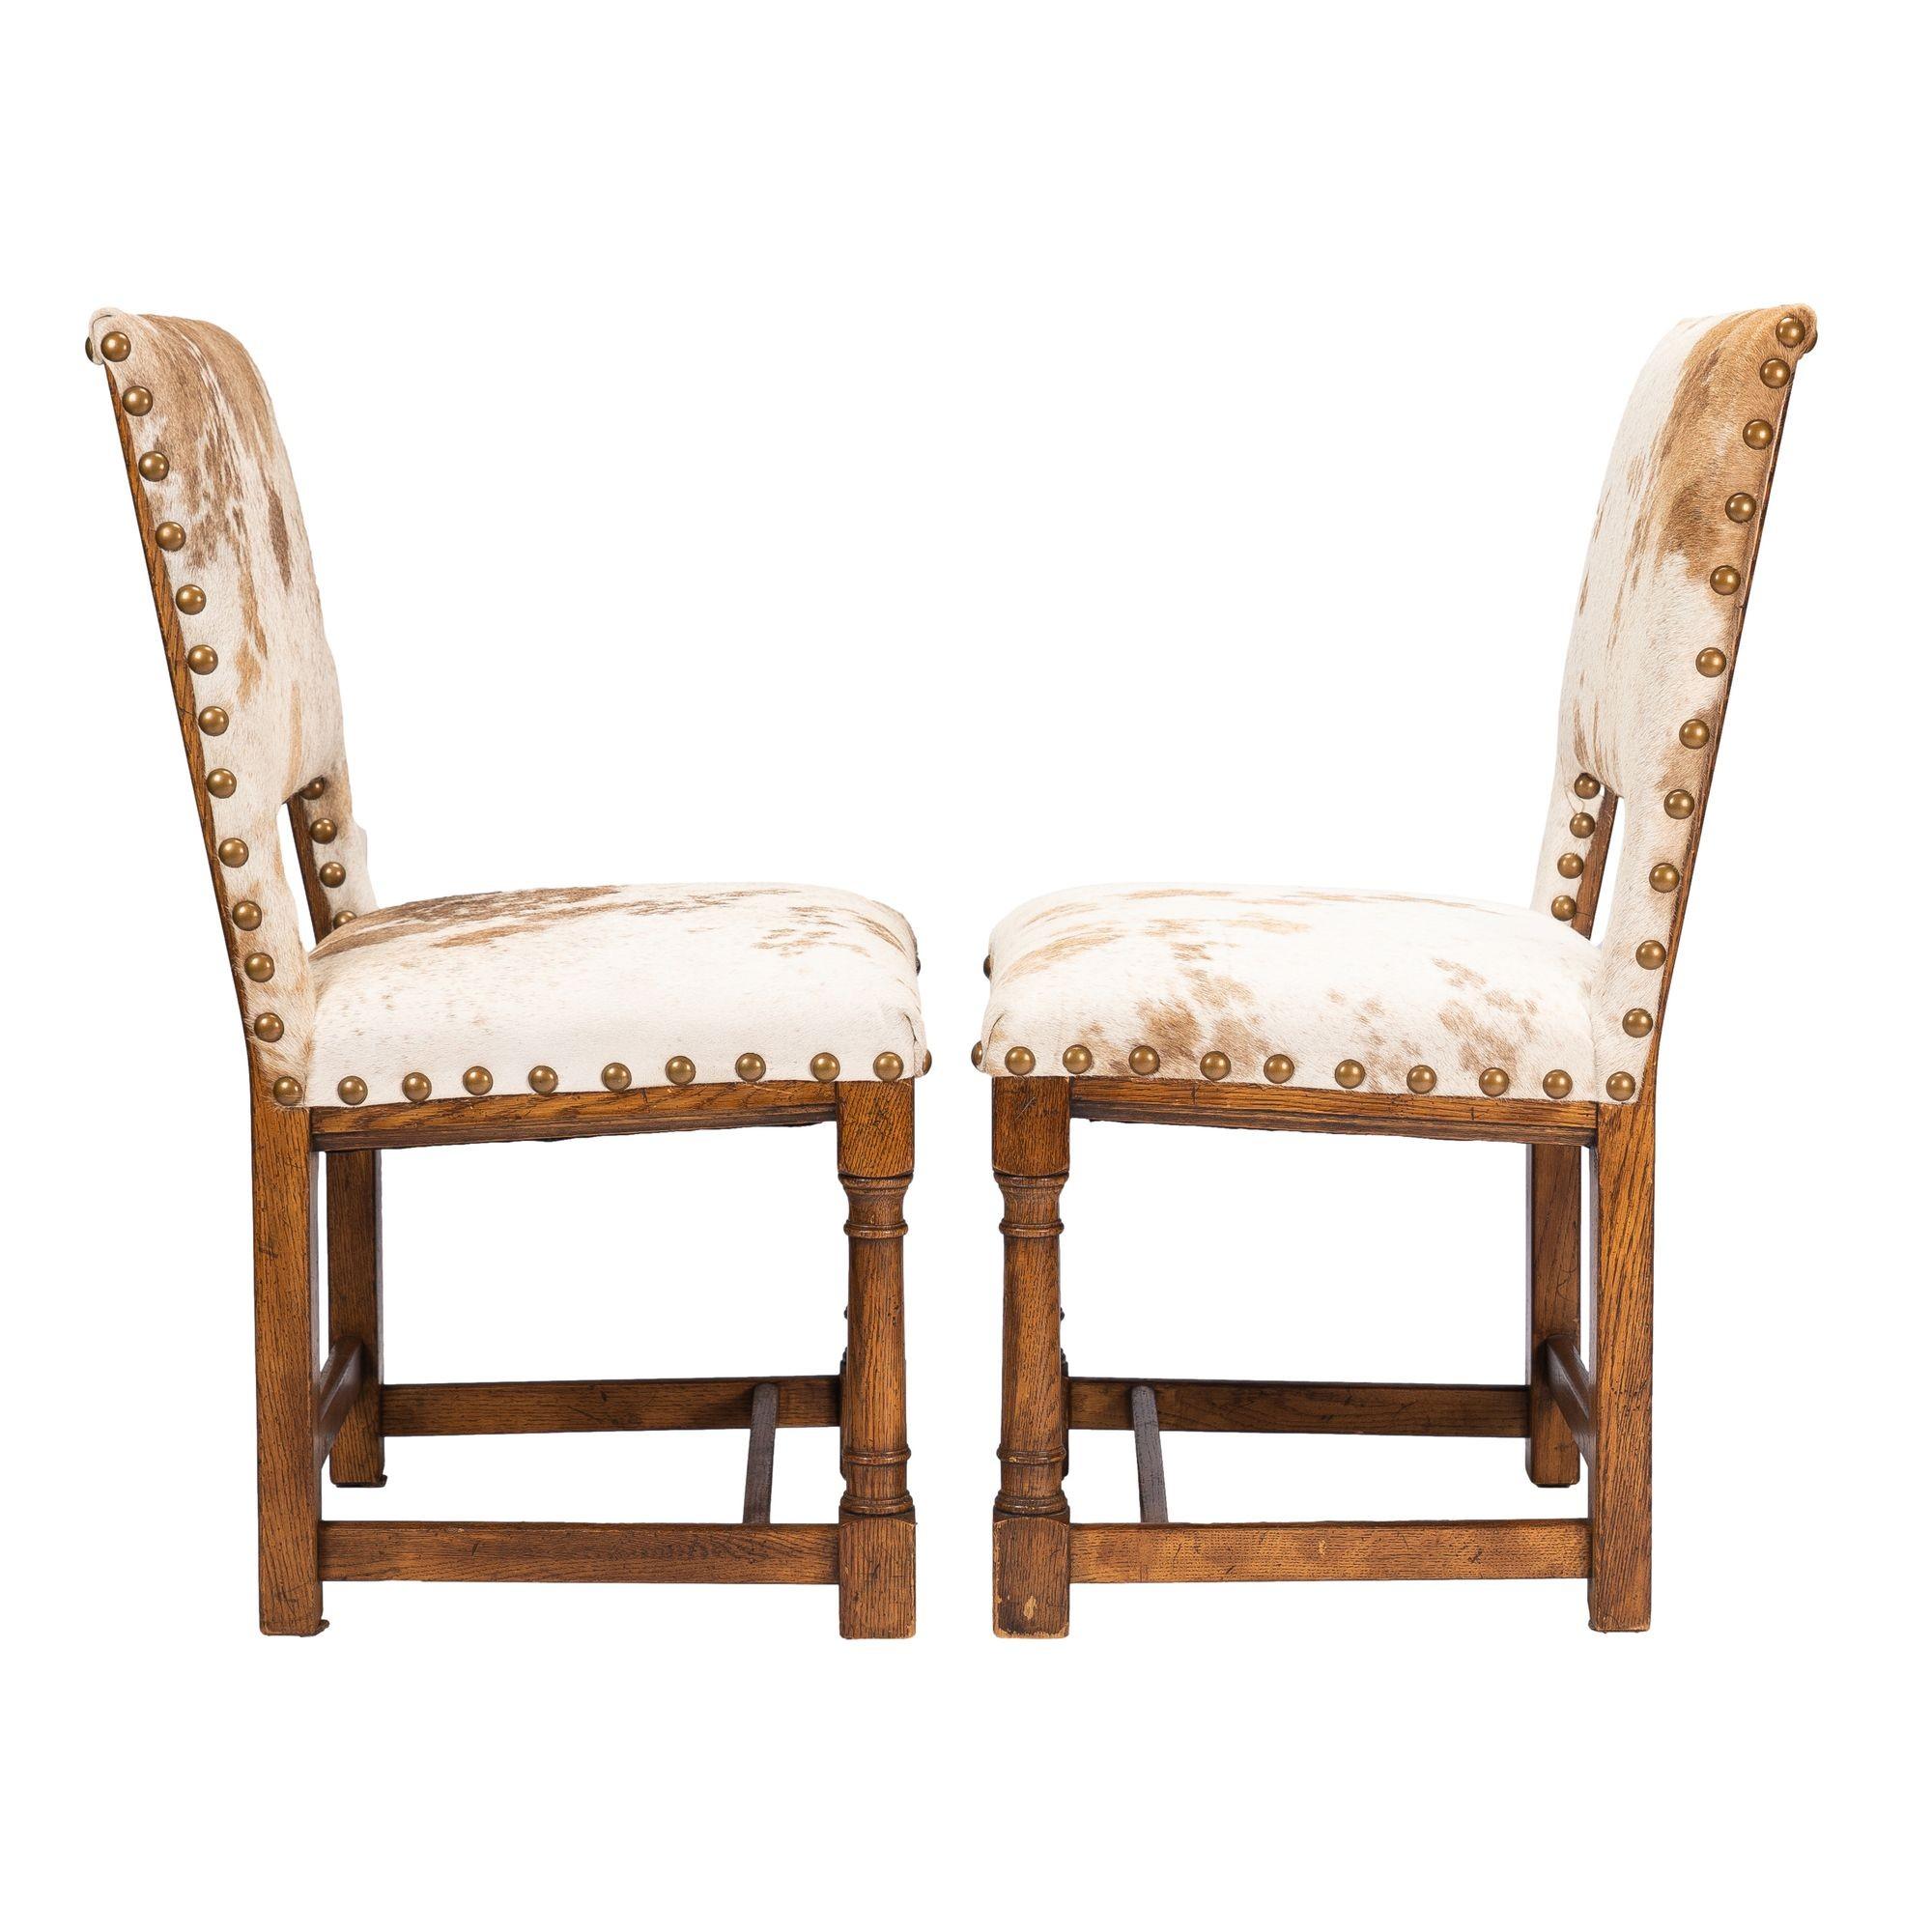 American Pair of Jacobean style hair on hide oak side chairs, 1920-35 For Sale